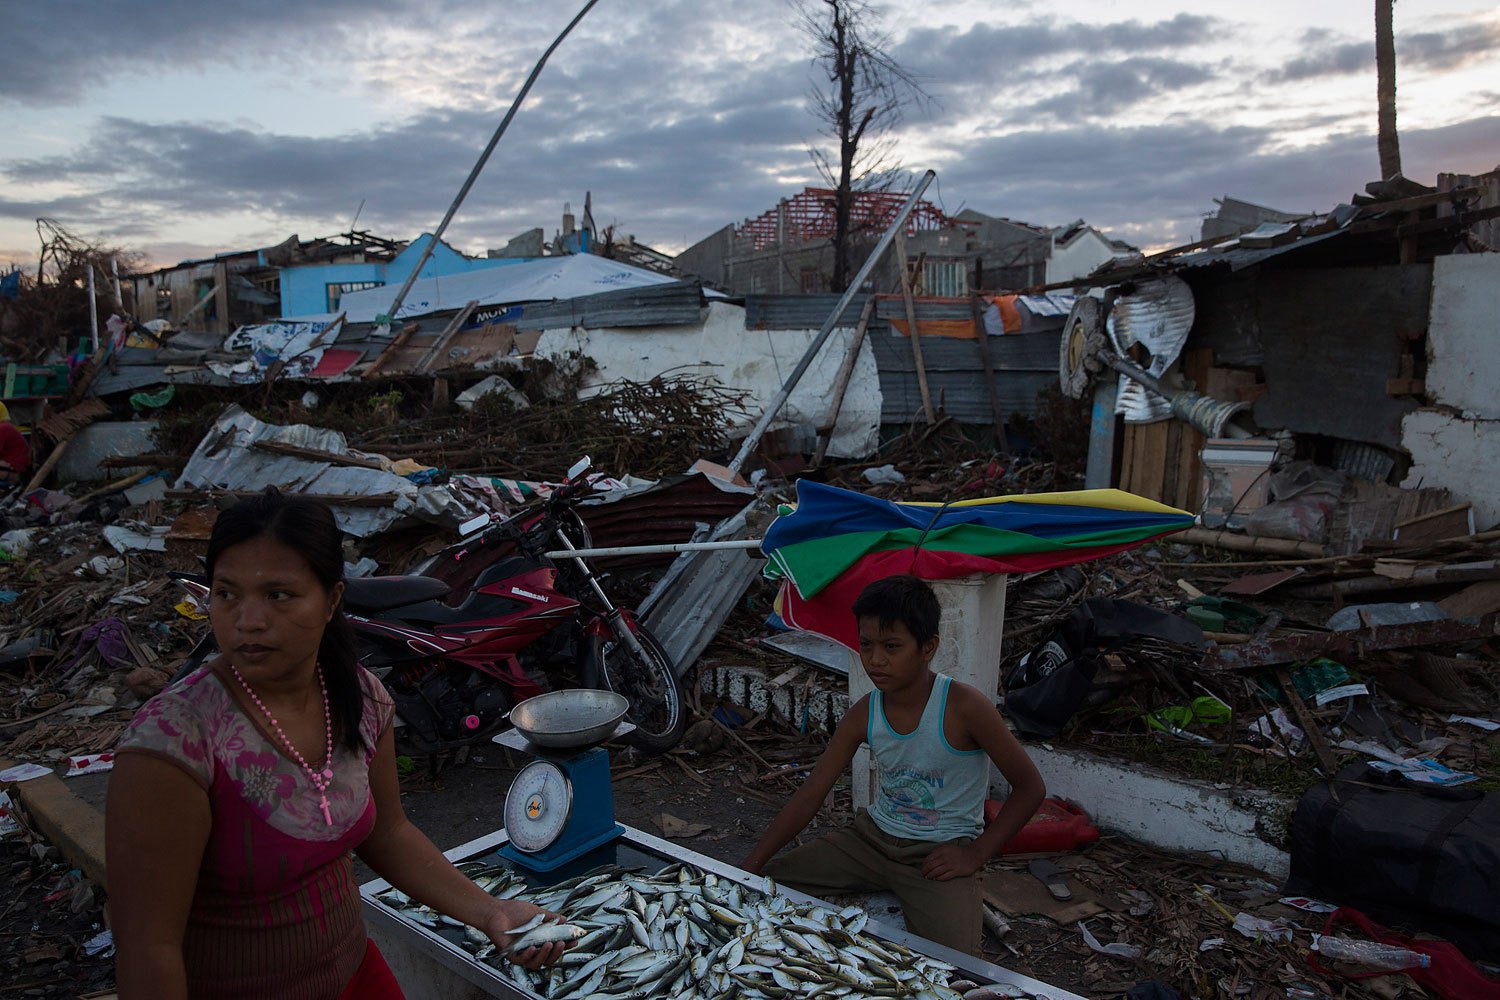 A boy sells fish in a neighbourhood damaged by Typhoon Haiyan as life begins to return to normal in Tanauan, Philippines on November 19, 2013.